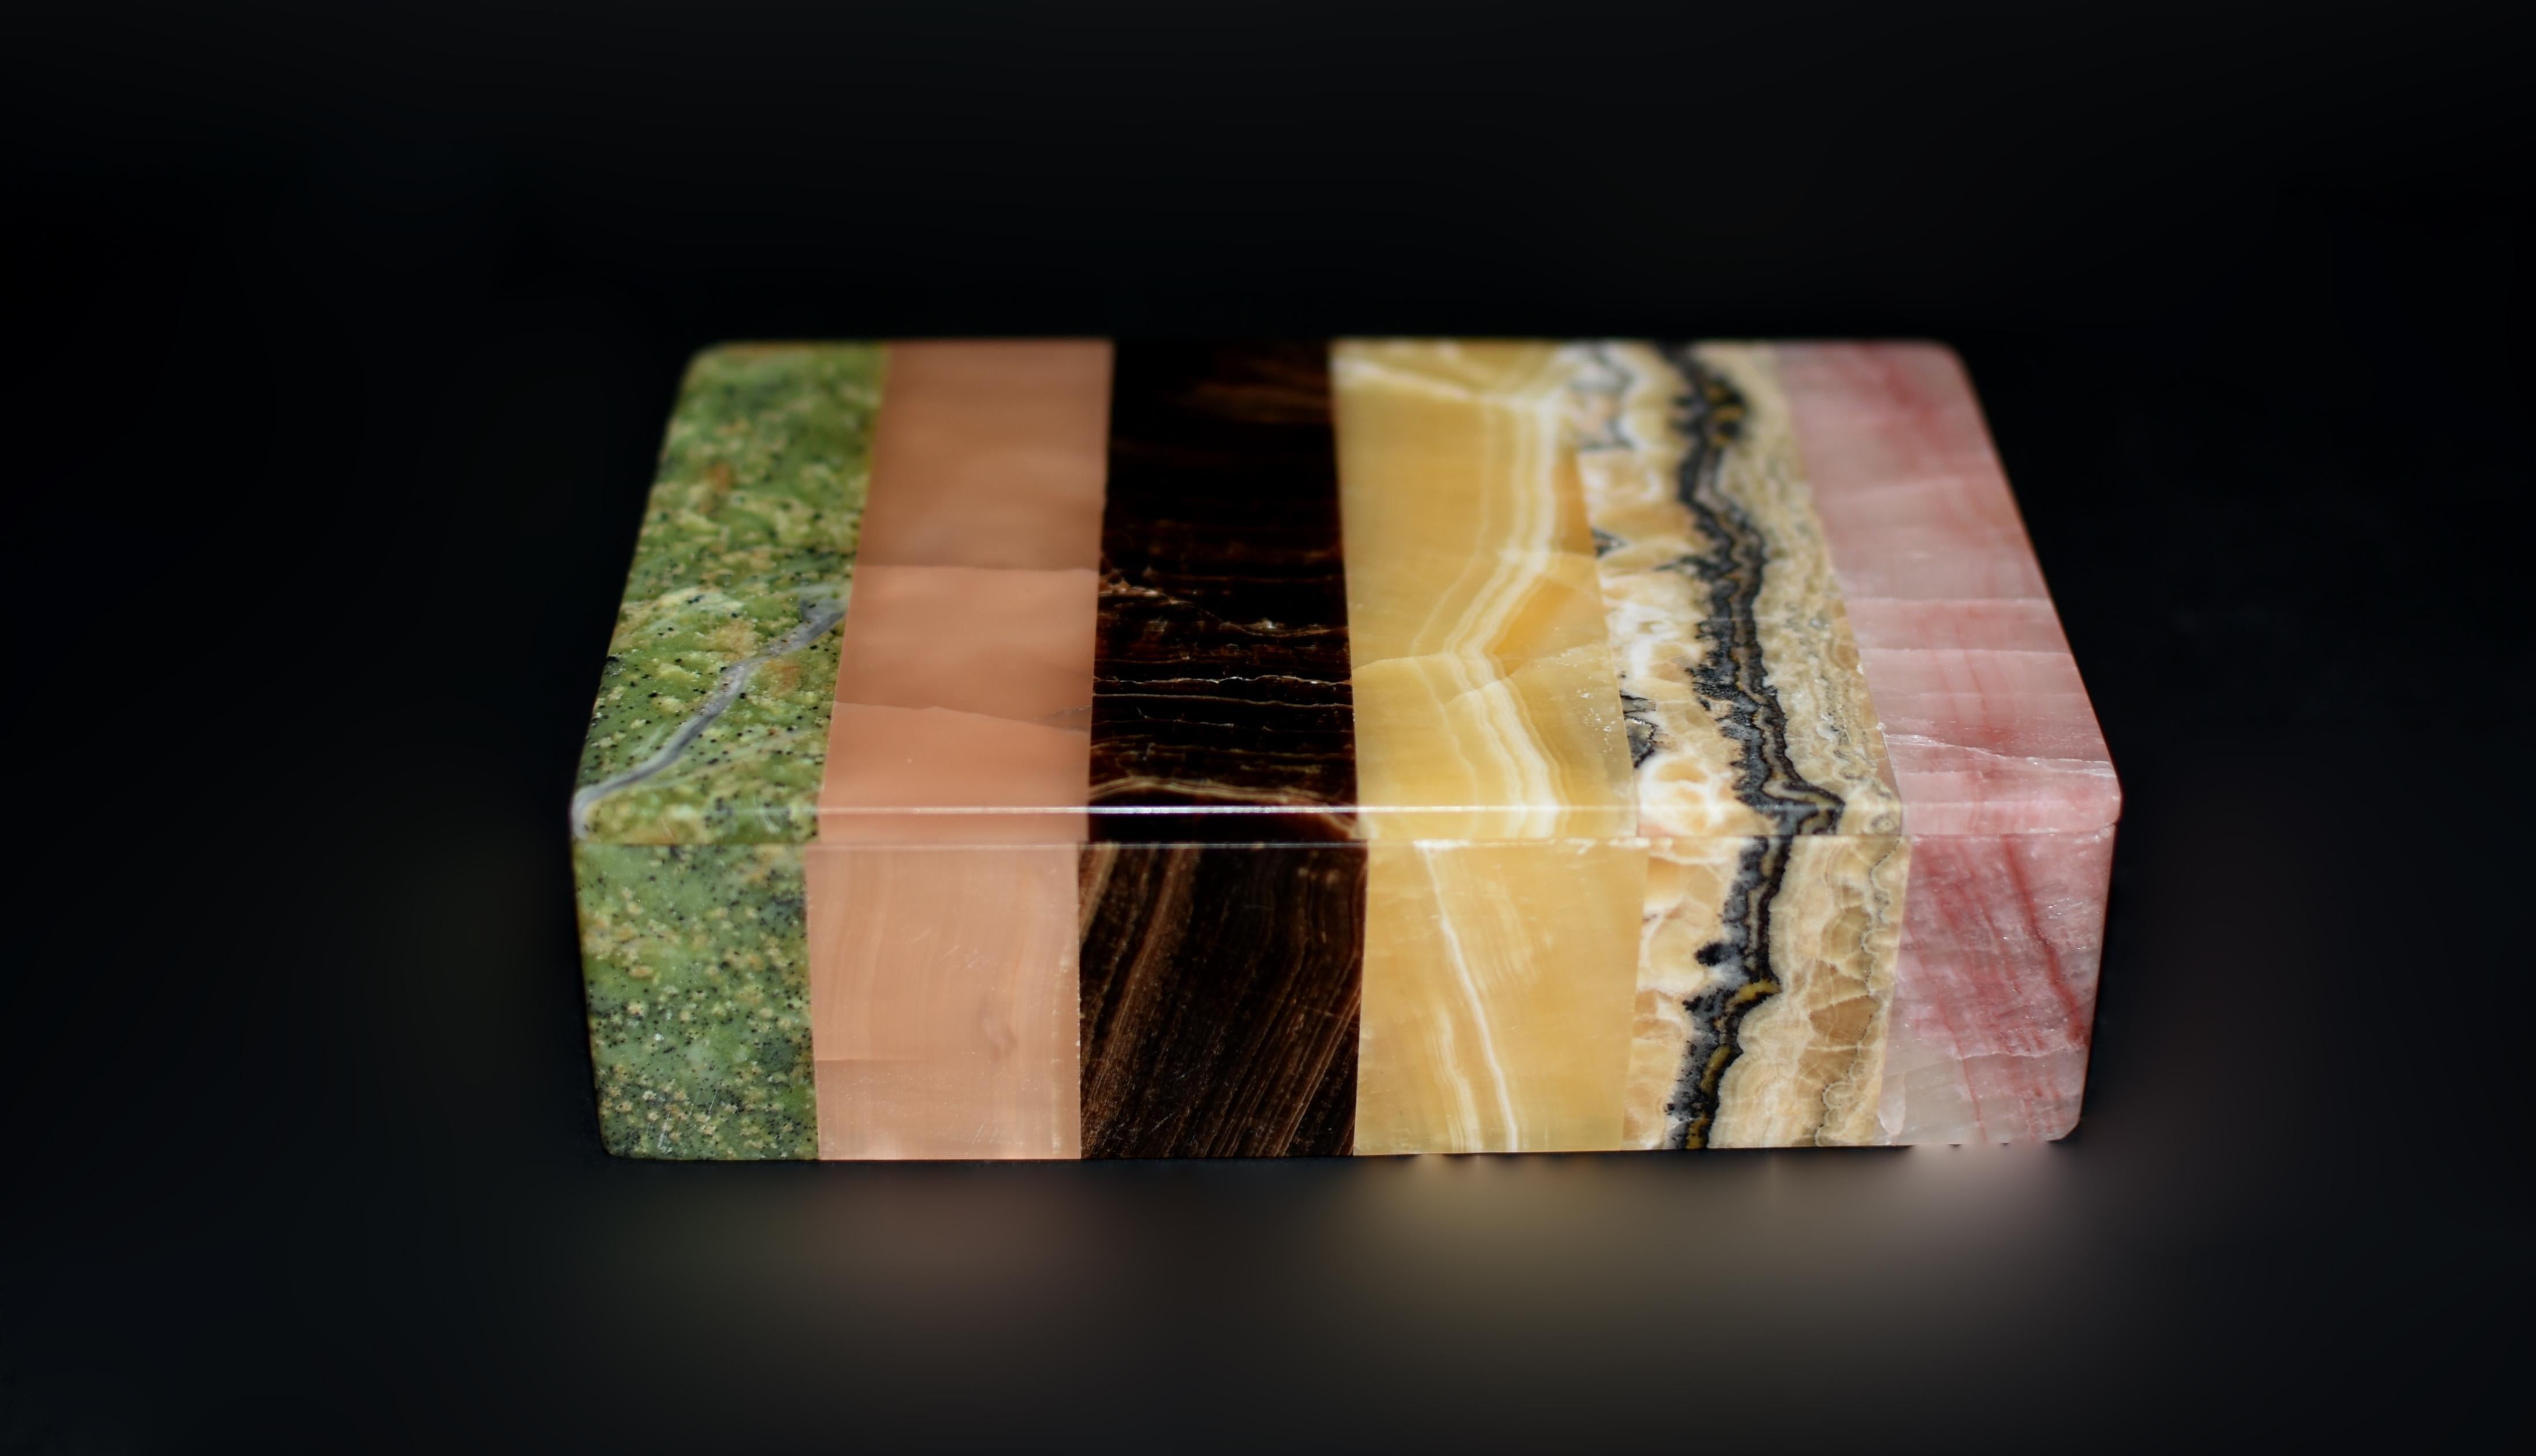 A beautiful 1.85-lb, pure gemstone box crafted from six natural stones, showcasing the artistry of a master craftsman. A harmonious blend of green serpentine, chocolate obsidian, honey calcite onyx, pink rhodonite, and rose quartz each cut into